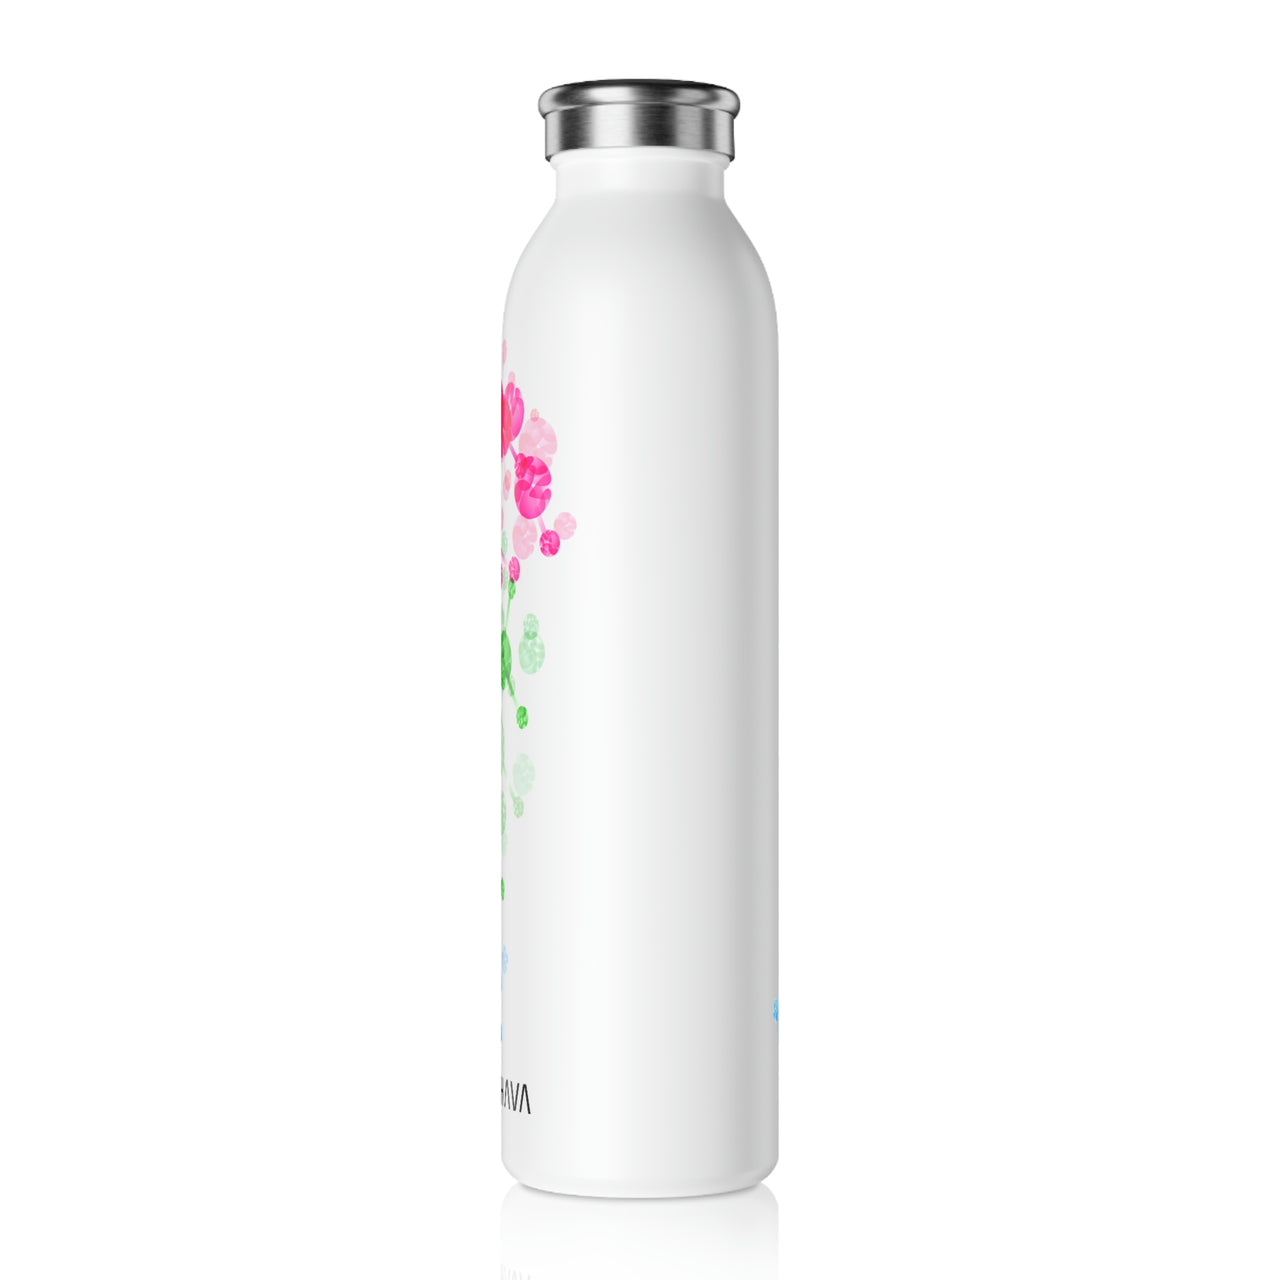 Polysexual Flag Slim Water Bottle Philly Pride - My Rainbow is In My DNA SHAVA CO